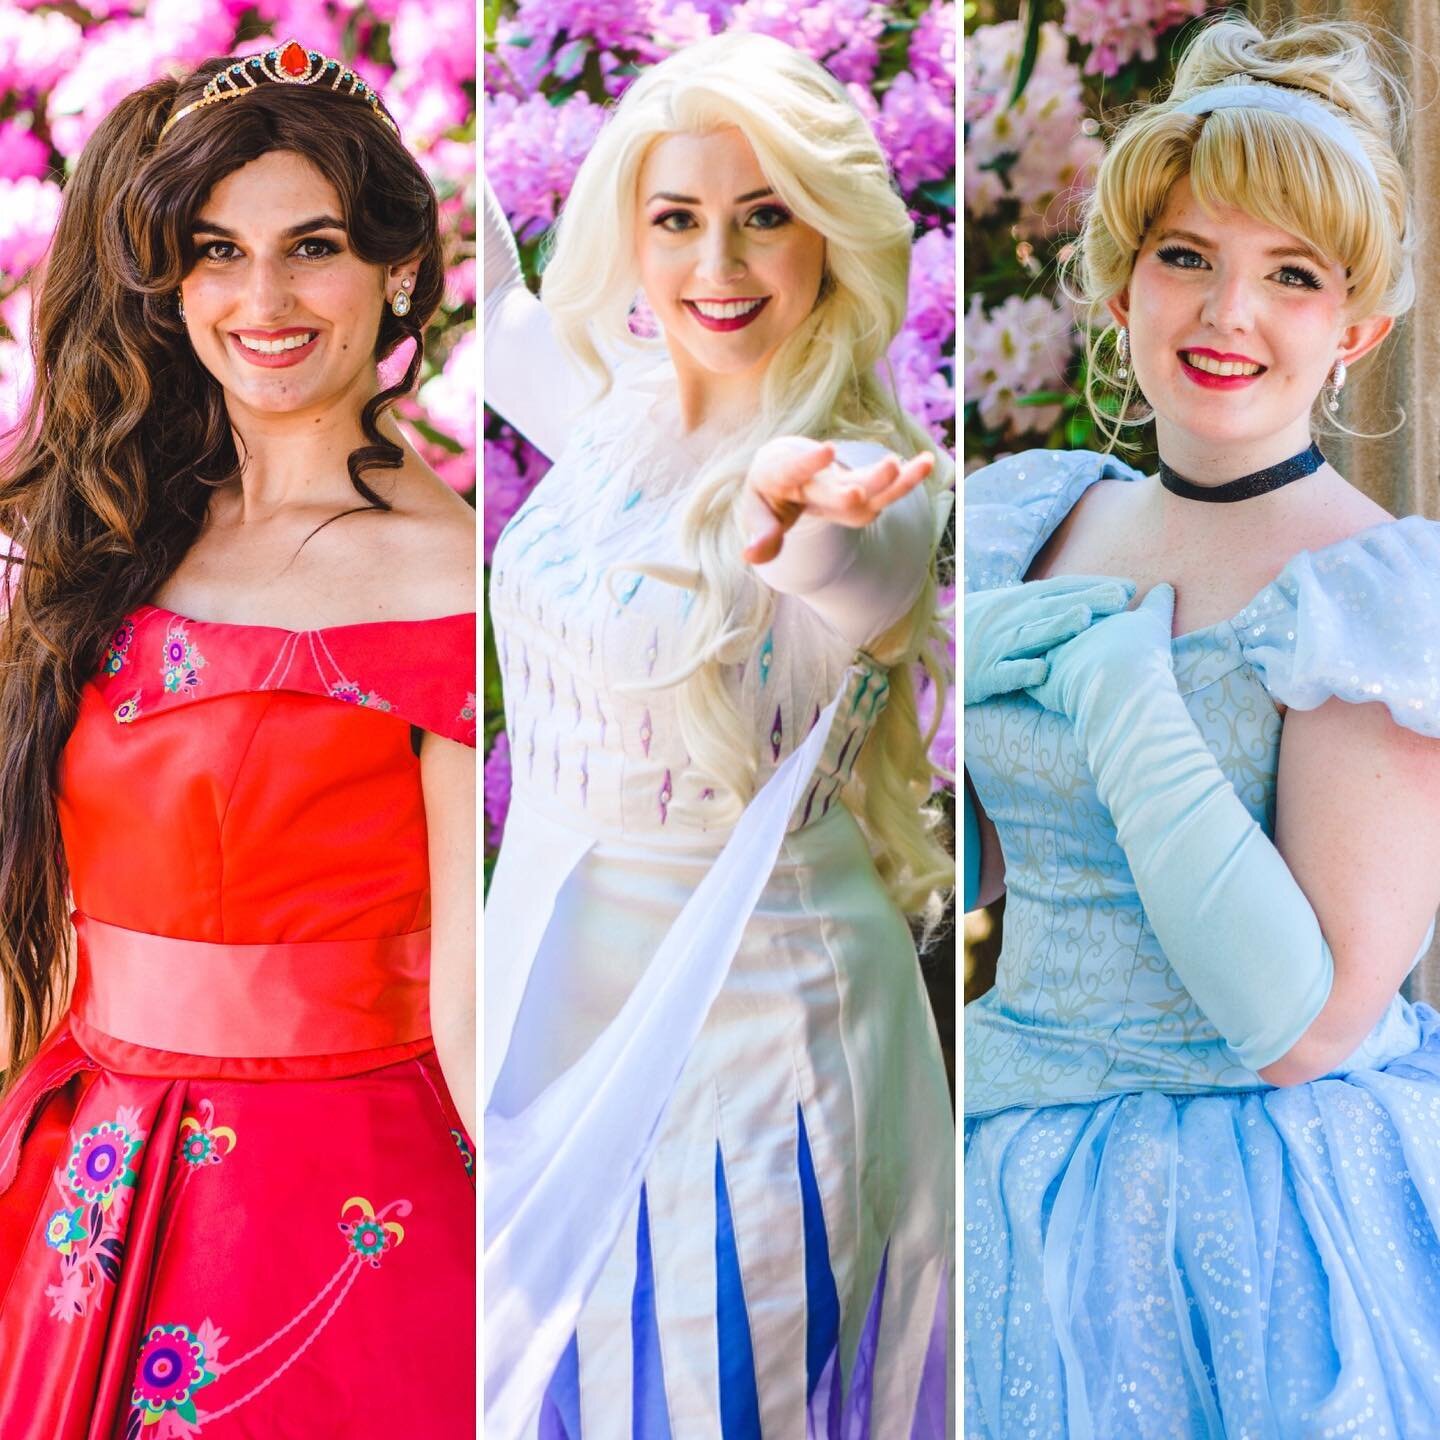 Are you wearing red, white, or blue today?
Happy 4th of July!
❤️🤍💙
Book a Character visit with two or more characters for dates in September or October and get buy-one-get-one free! 
Book at www.sparkadreamprincessparties.com!
.
.
.
.
.
.
.
.
.
.
.